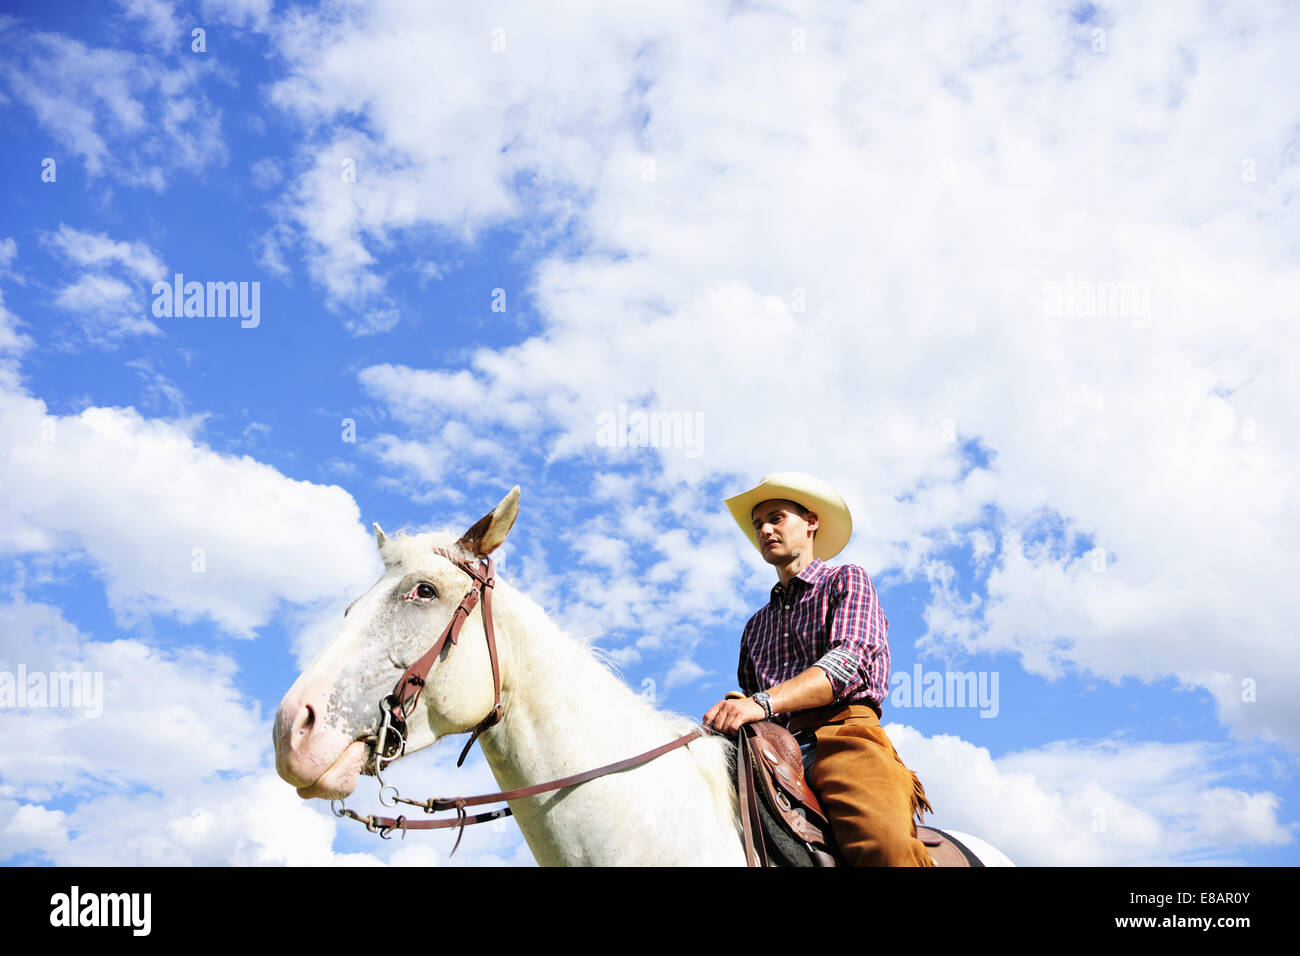 Low angle portrait of young man in cowboy gear riding horse Stock Photo